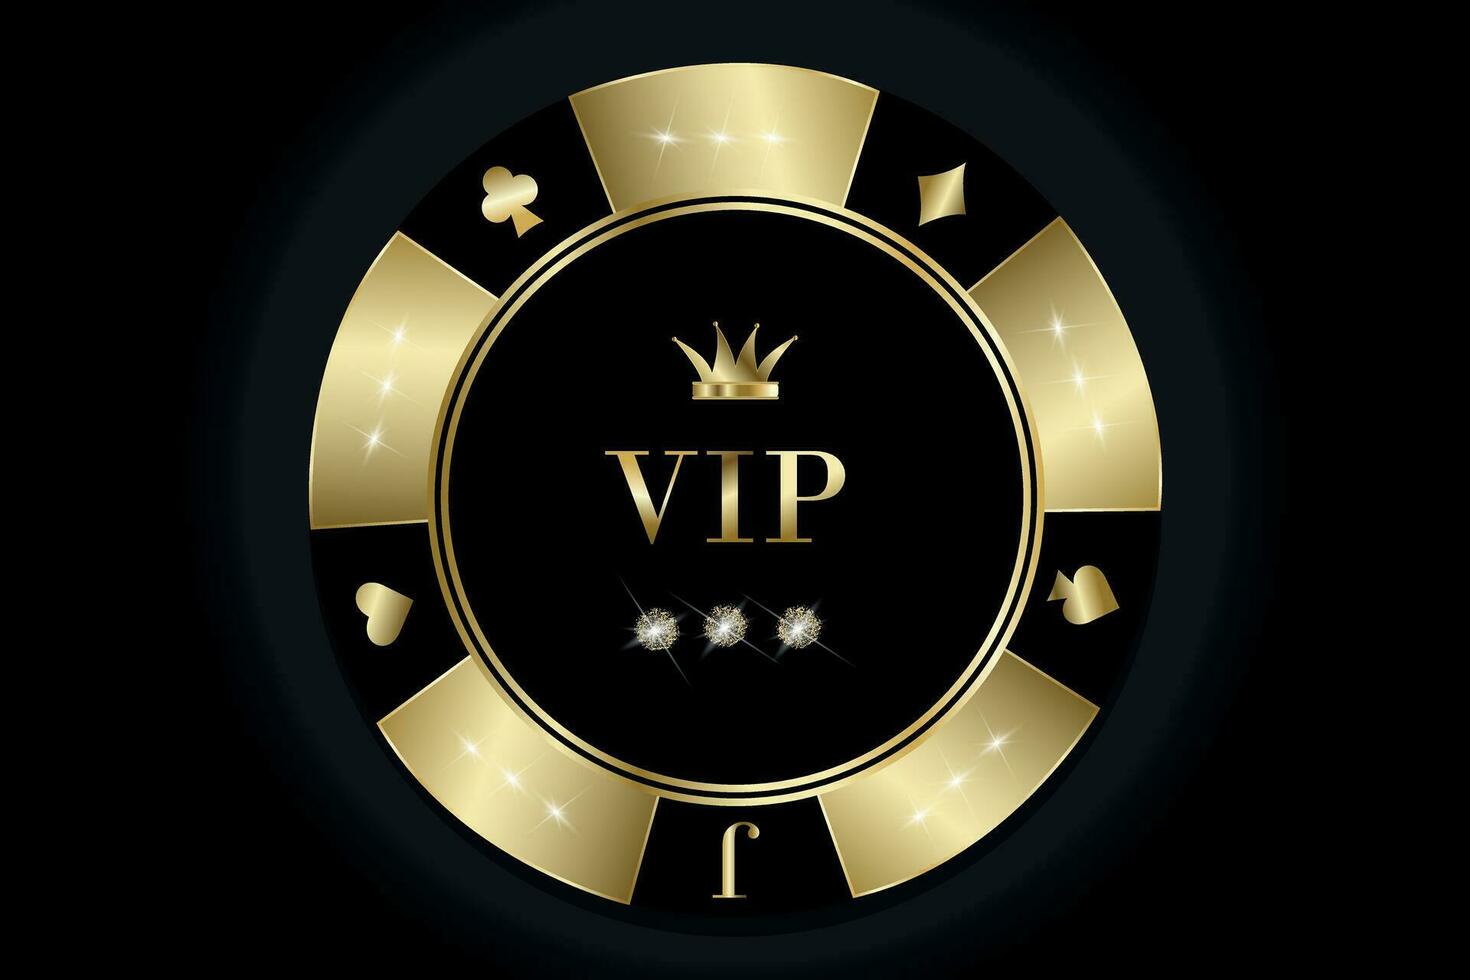 VIP gold casino chip. Casino poker chip element, gambling game isolated on black background. Vector illustration for cards, casino, game design, advertising. Casino concept.